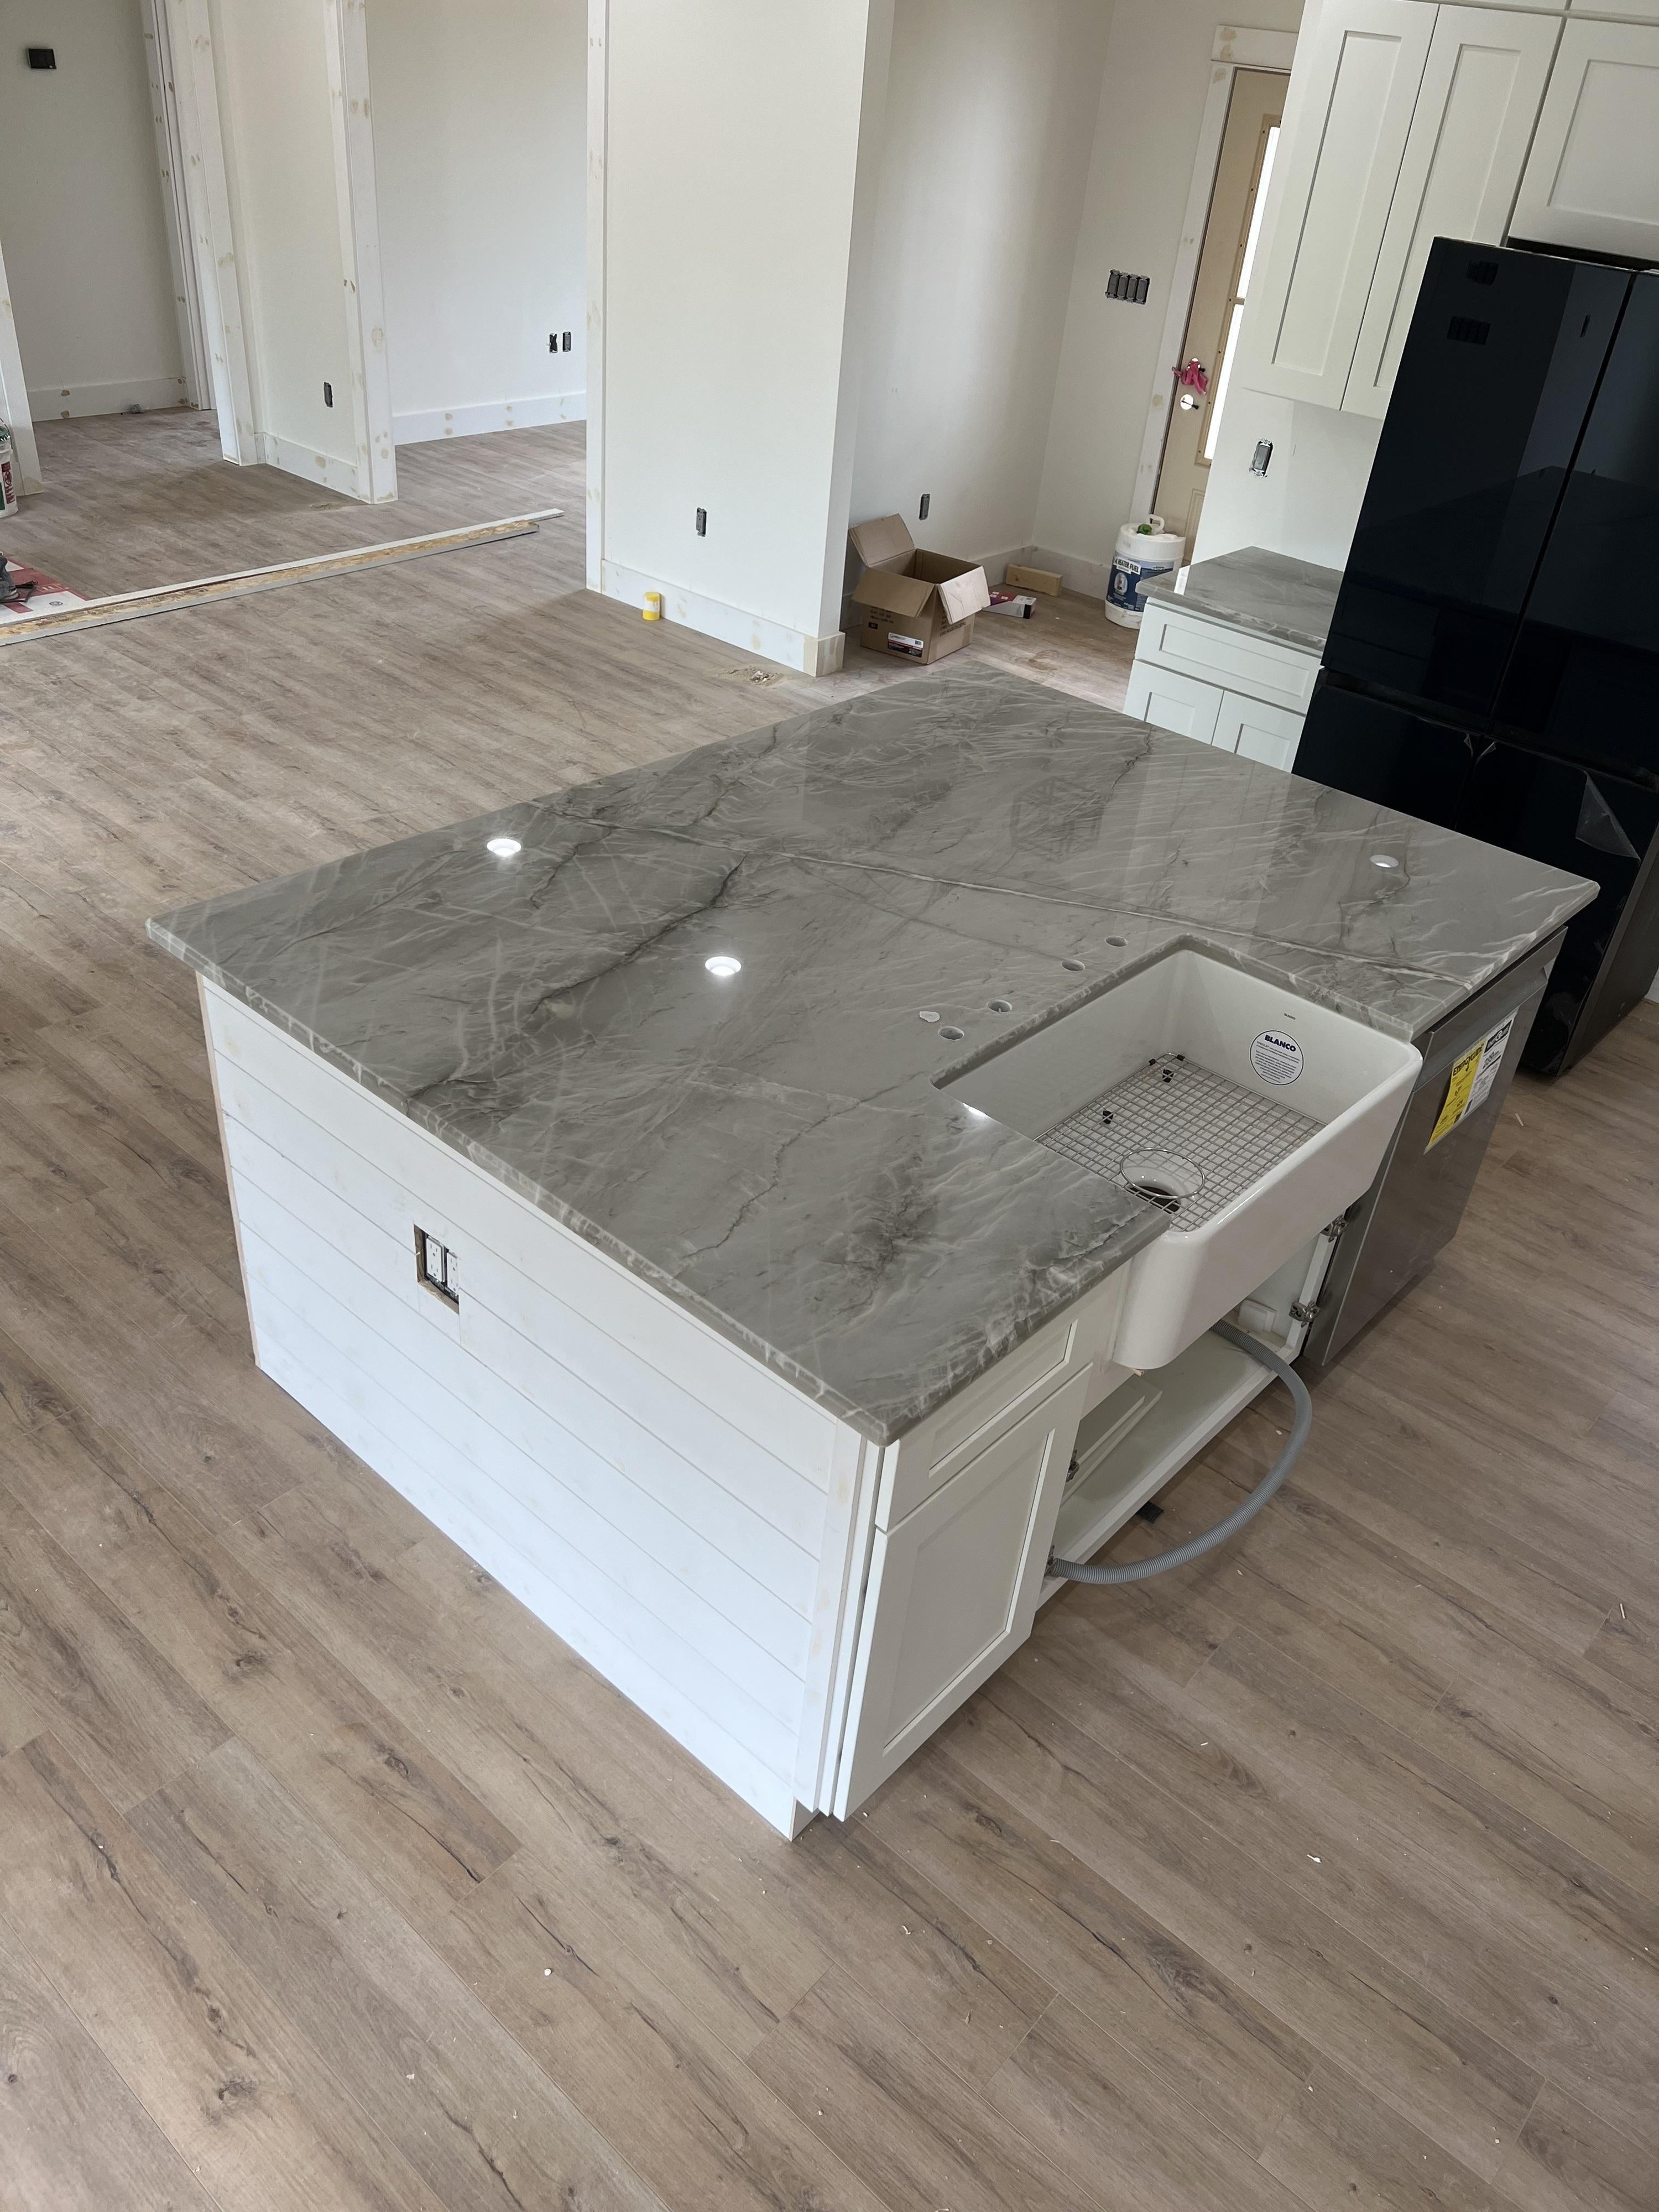 installing marble countertop in a newly-renovated kitchen